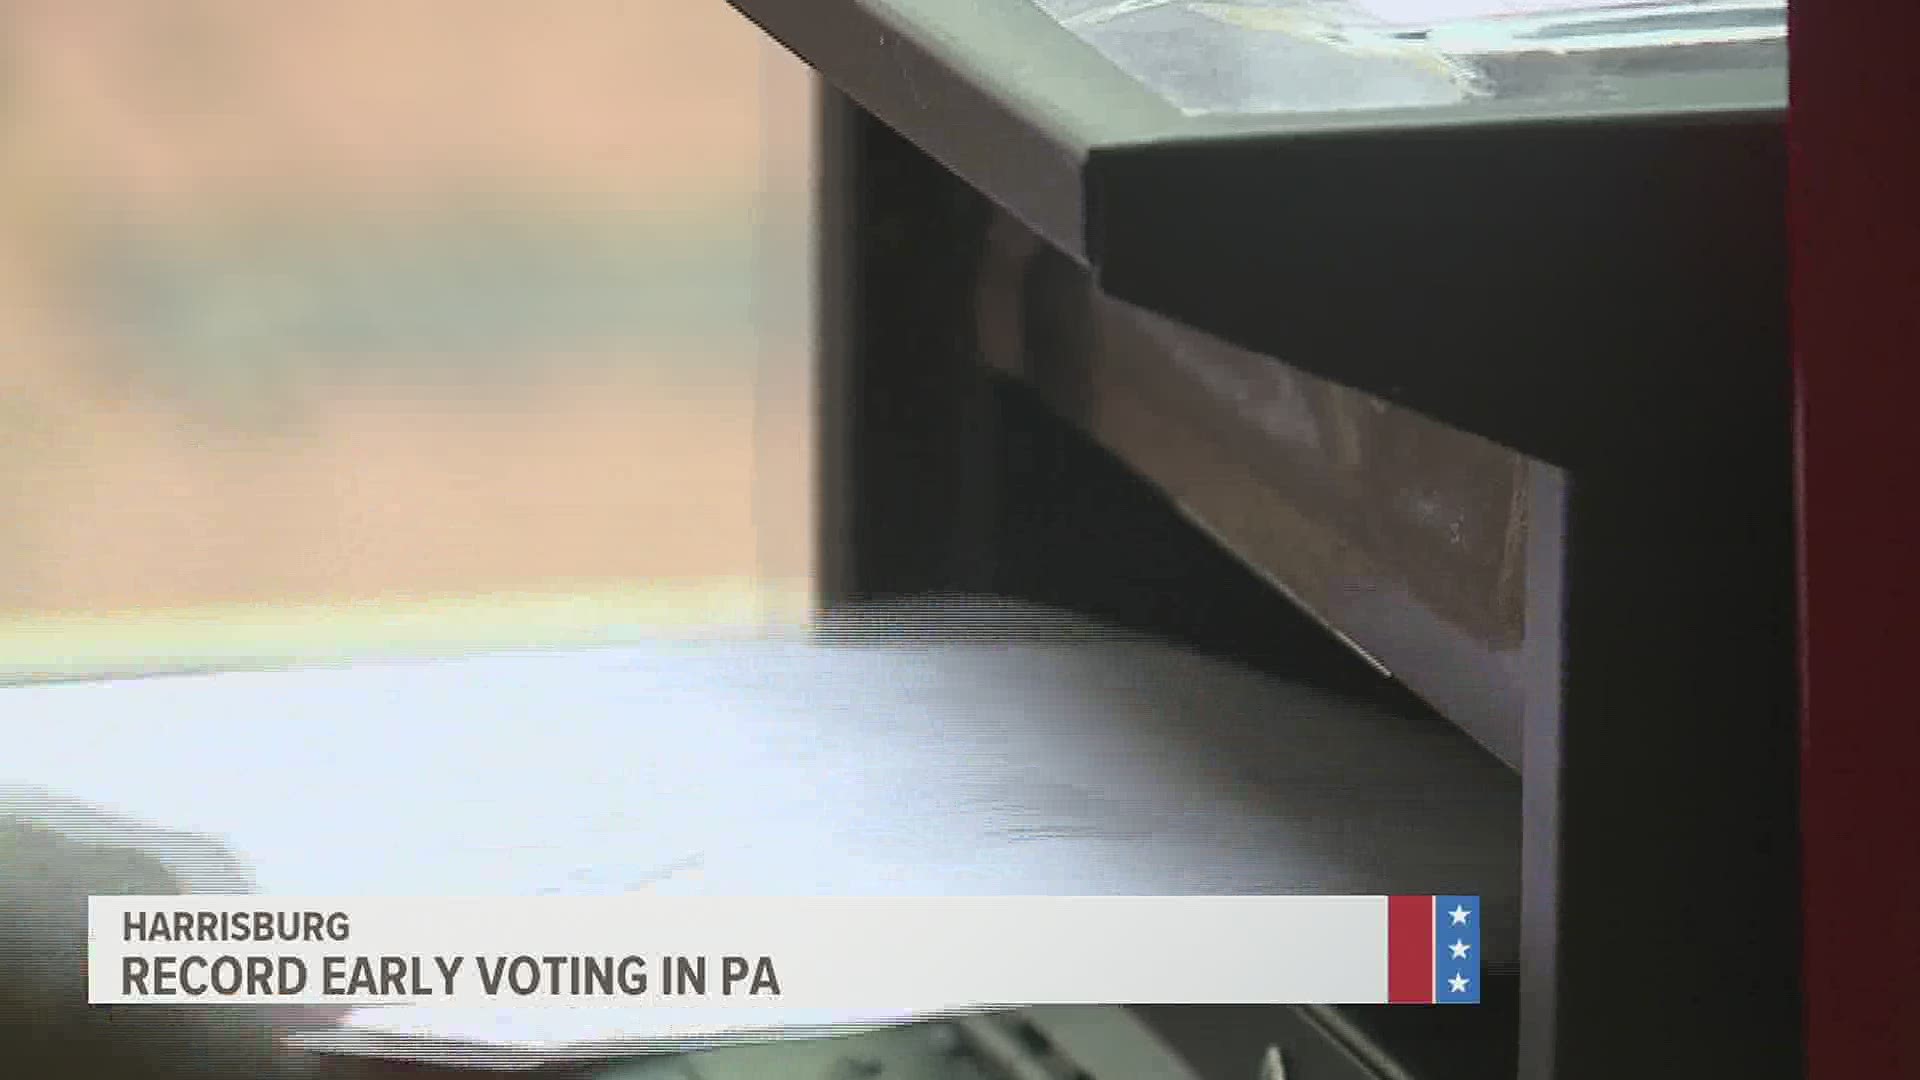 Early voting is well underway in Pennsylvania. Of the state’s 9 million registered voters, 1.7 million have already mailed or turned in their ballots.